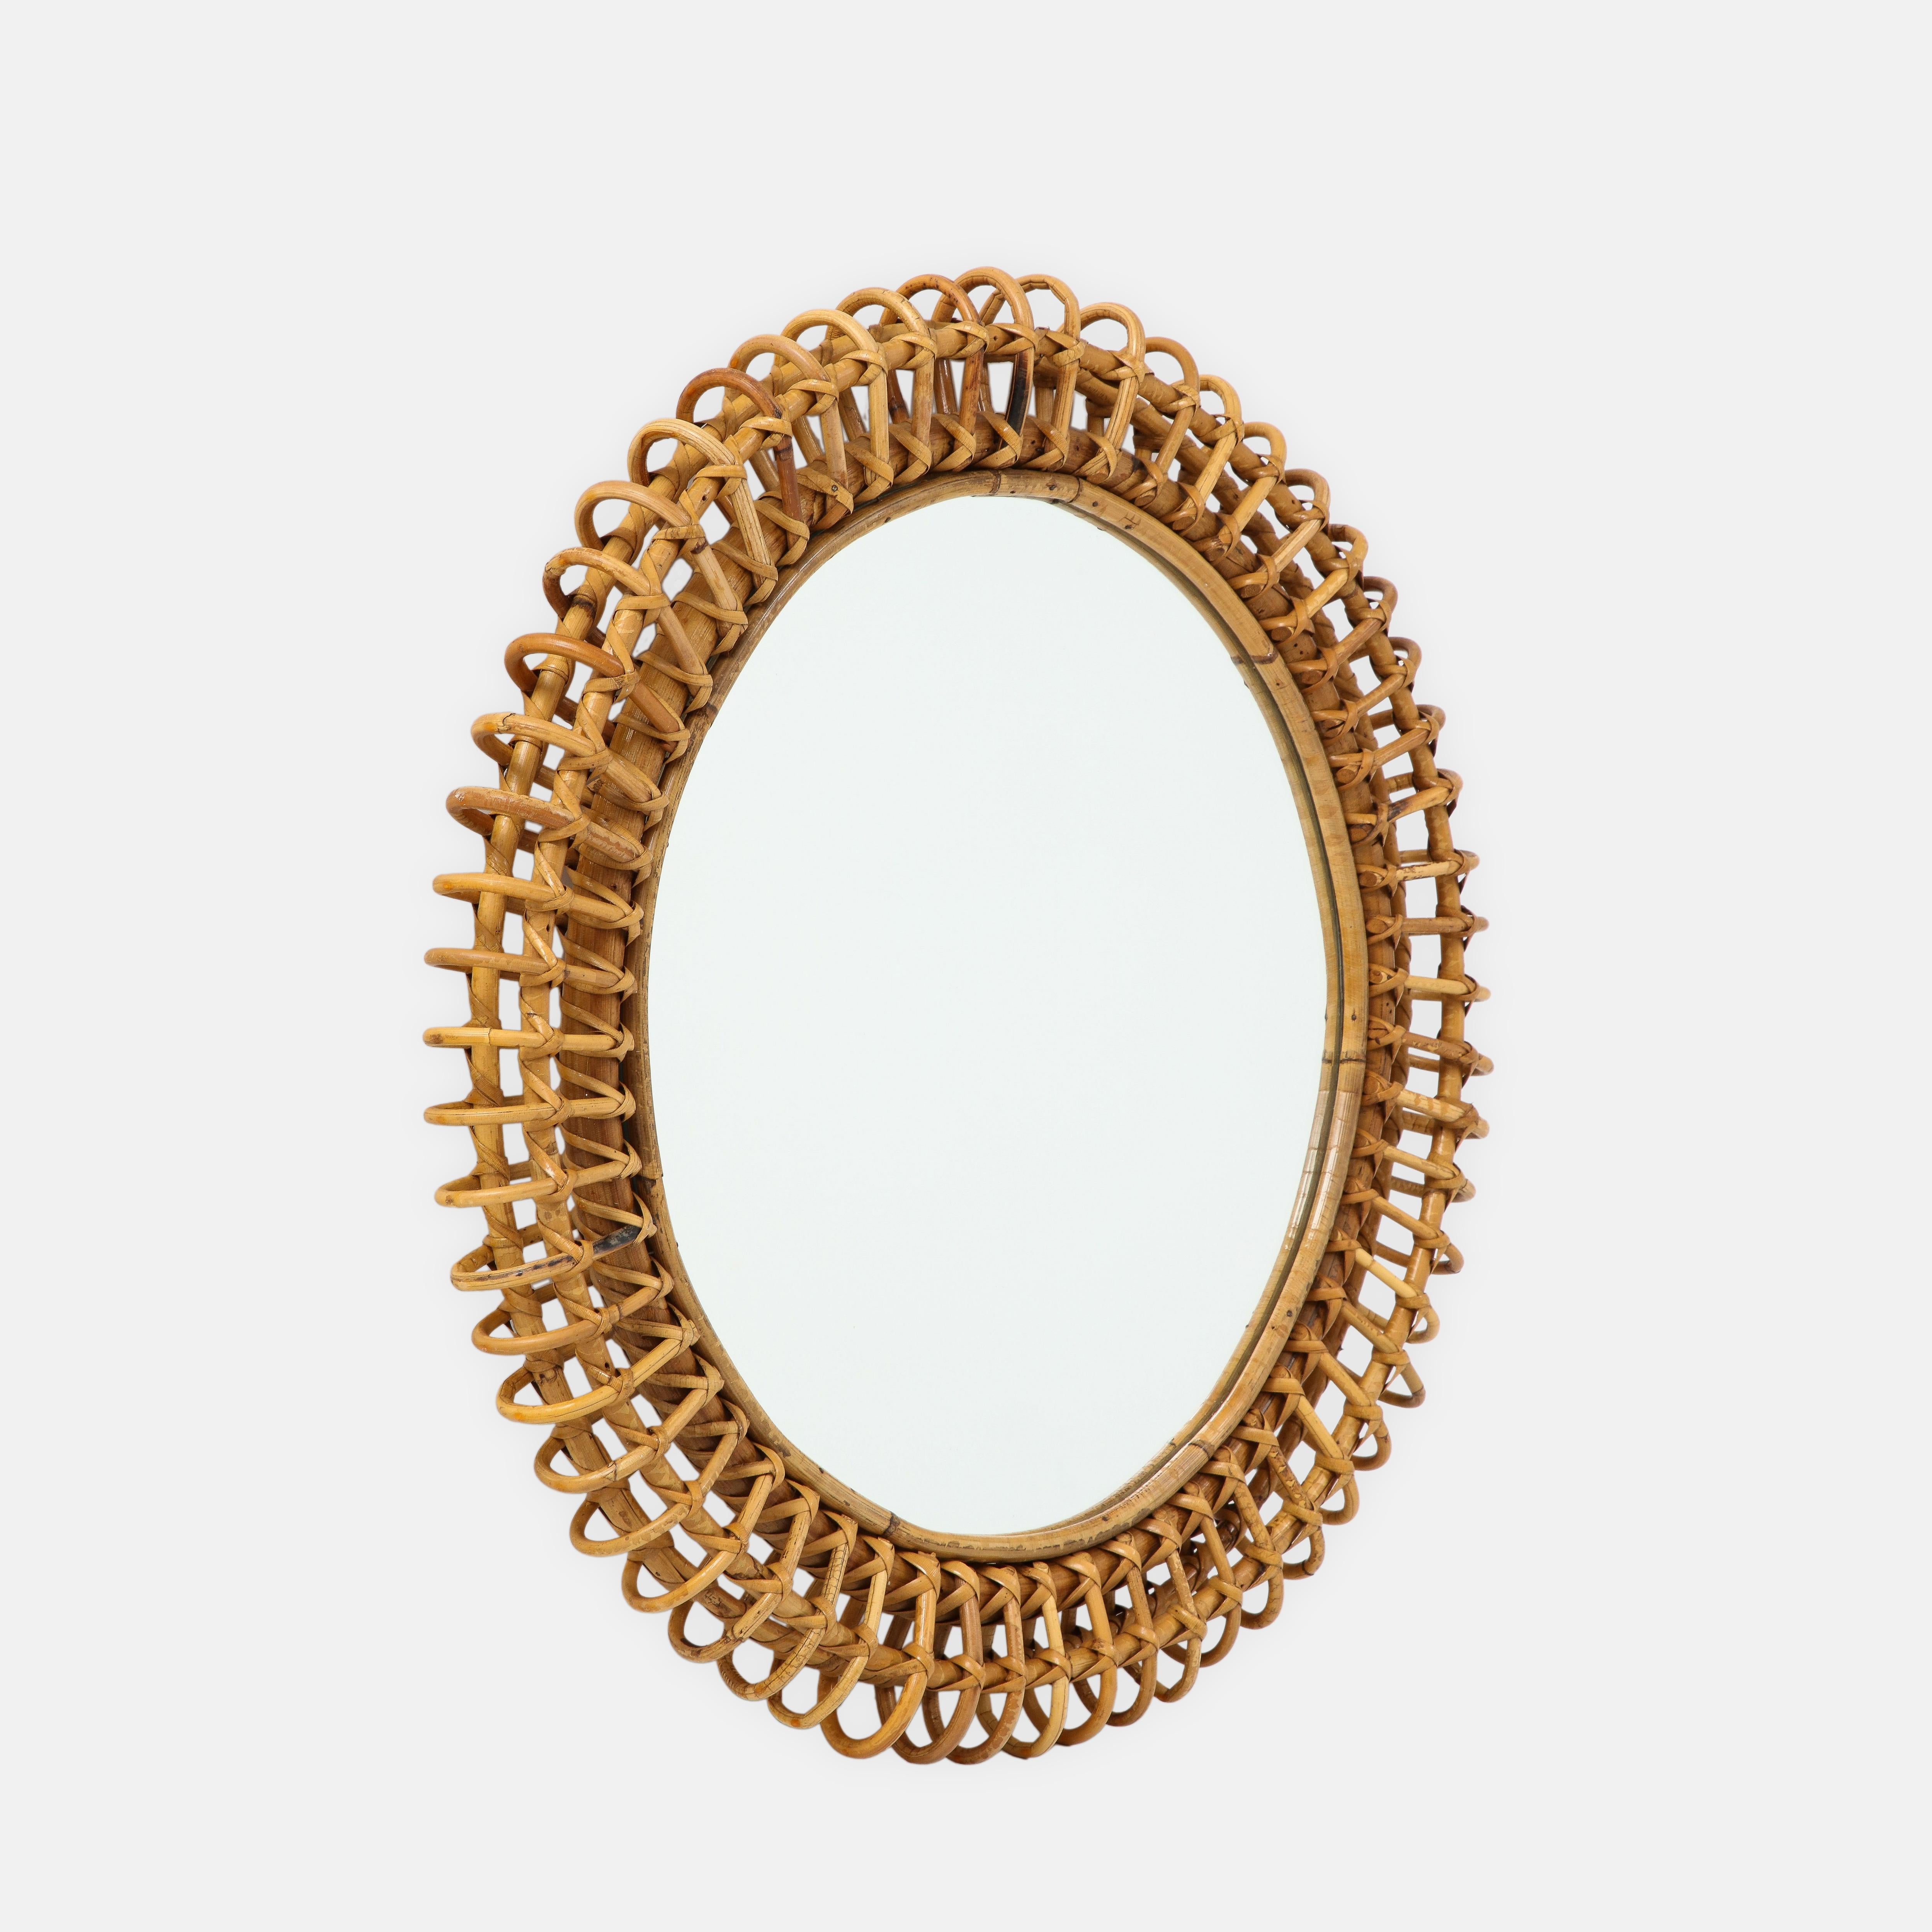 1950s Italian Bonacina round wall mirror composed of bamboo frame finely woven with rattan.